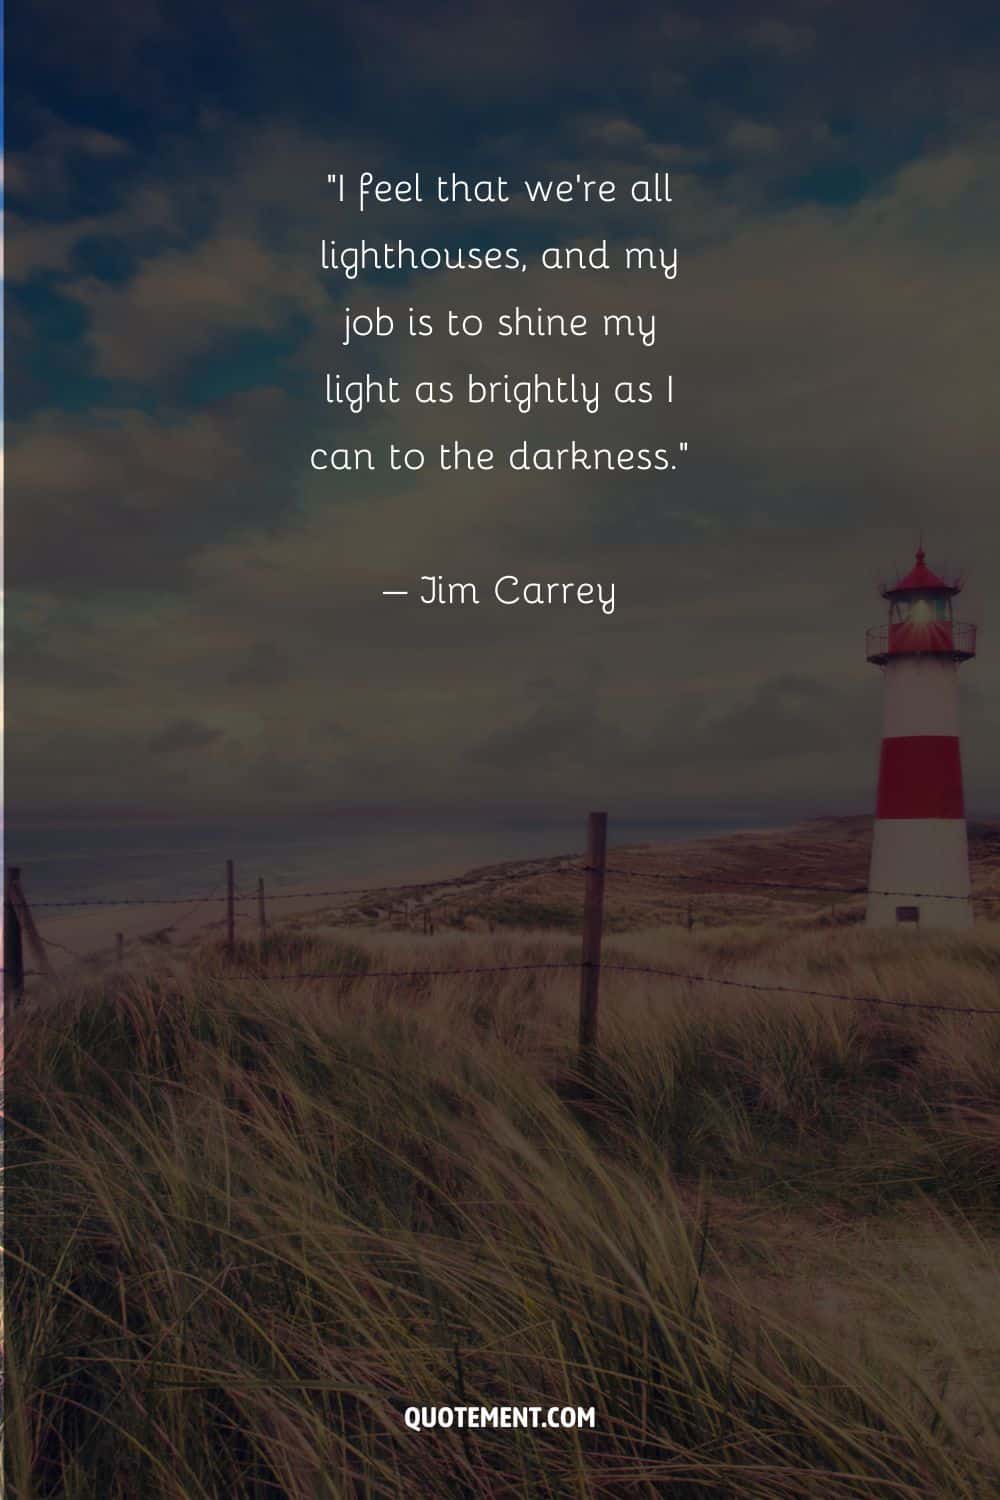 Motivational quote by Jim Carrey including symbolism and a lighthouse in the background